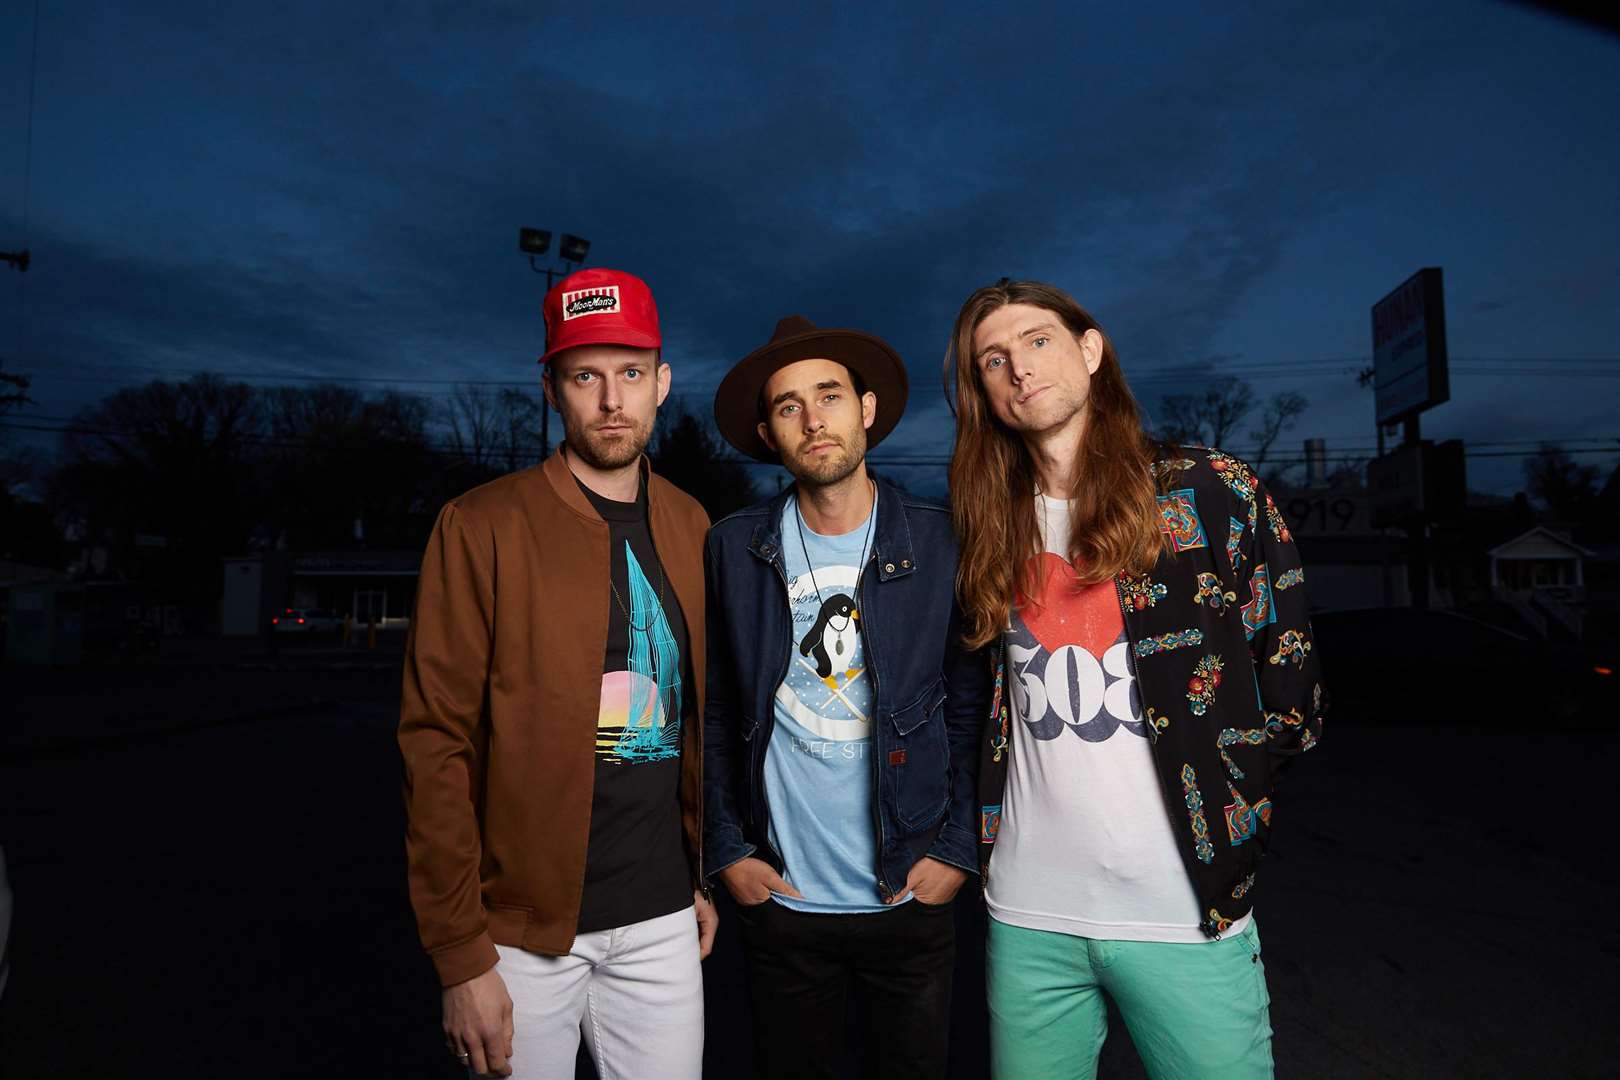 The East Pointers play folk music with an electronic twist.